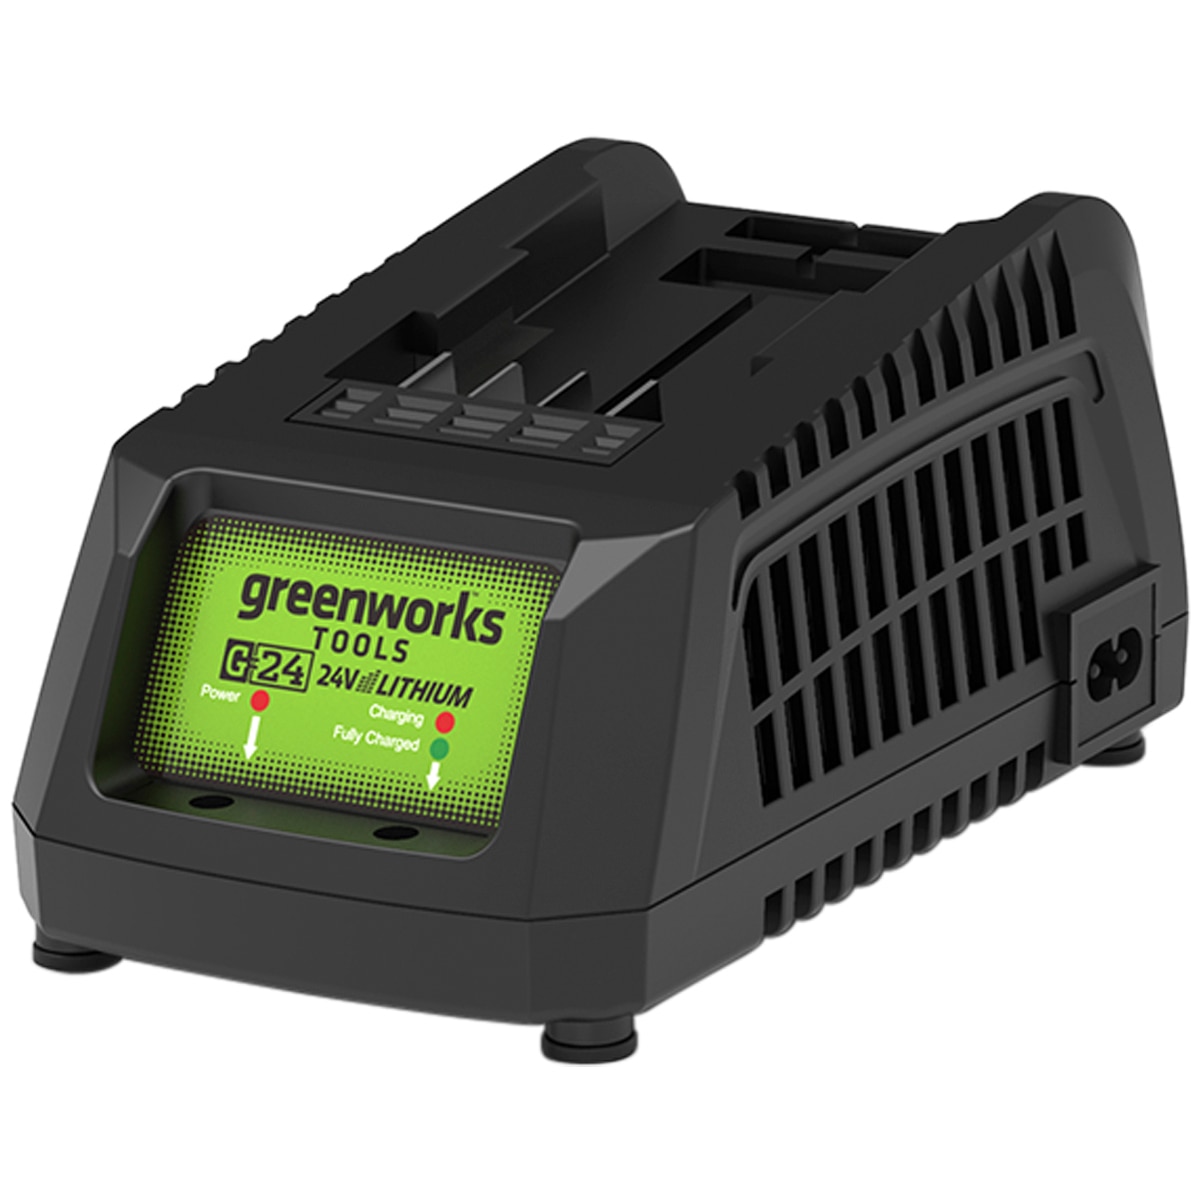 Greenworks 24V Brushless Drill Kit (2Ah Battery and Fast Charger in Case)